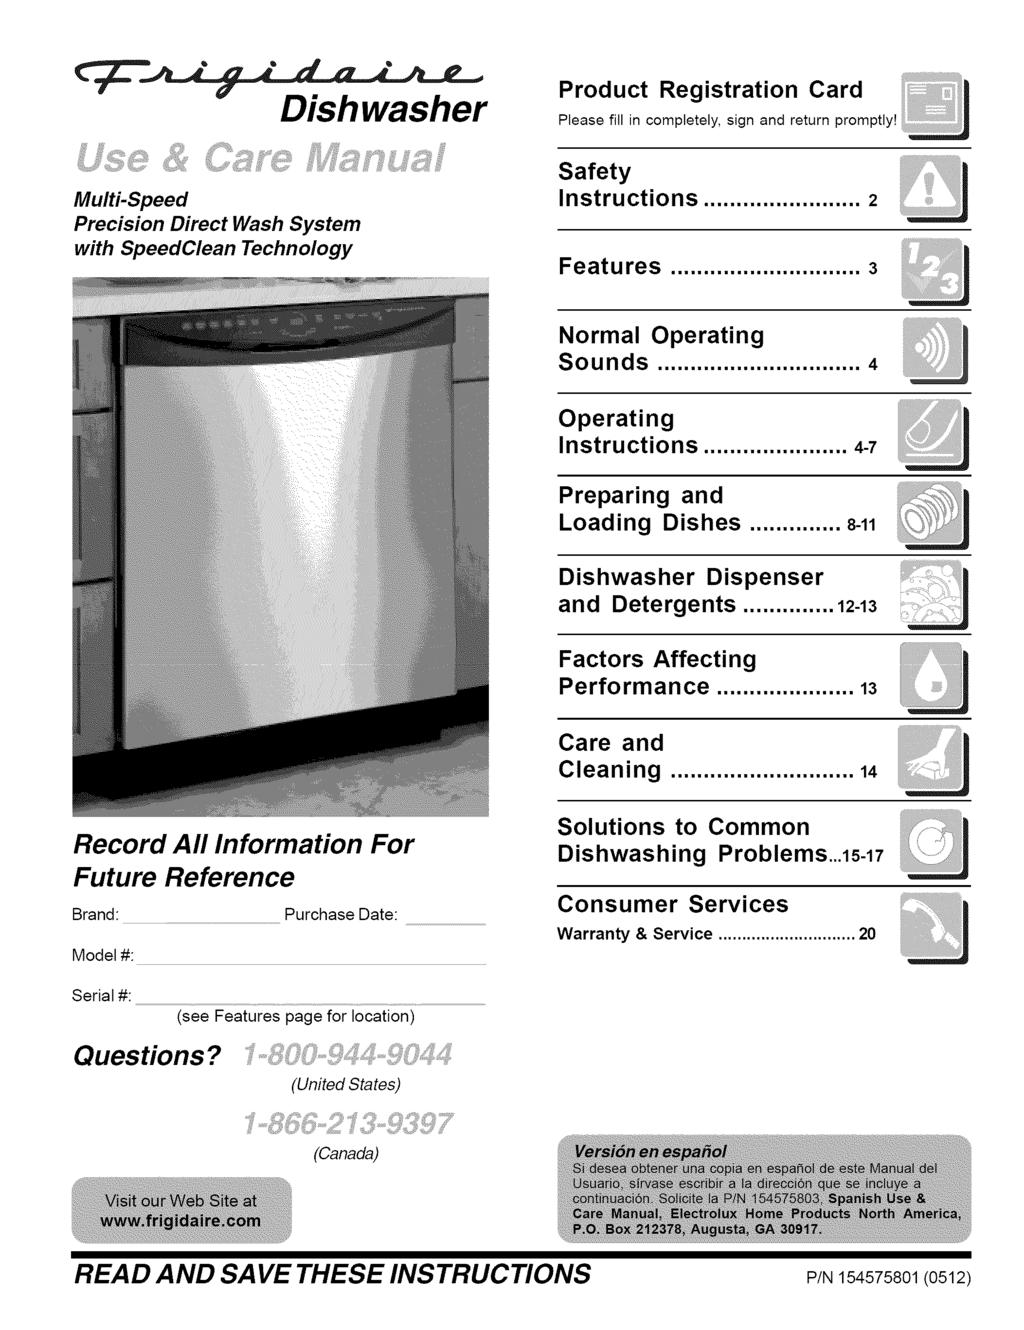 Dishwasher Product Registration Card Please fill in completely, sign and return promptly! Multi-Speed Precision Direct Wash System with SpeedClean Technology Safety Instructions... 2 Features.